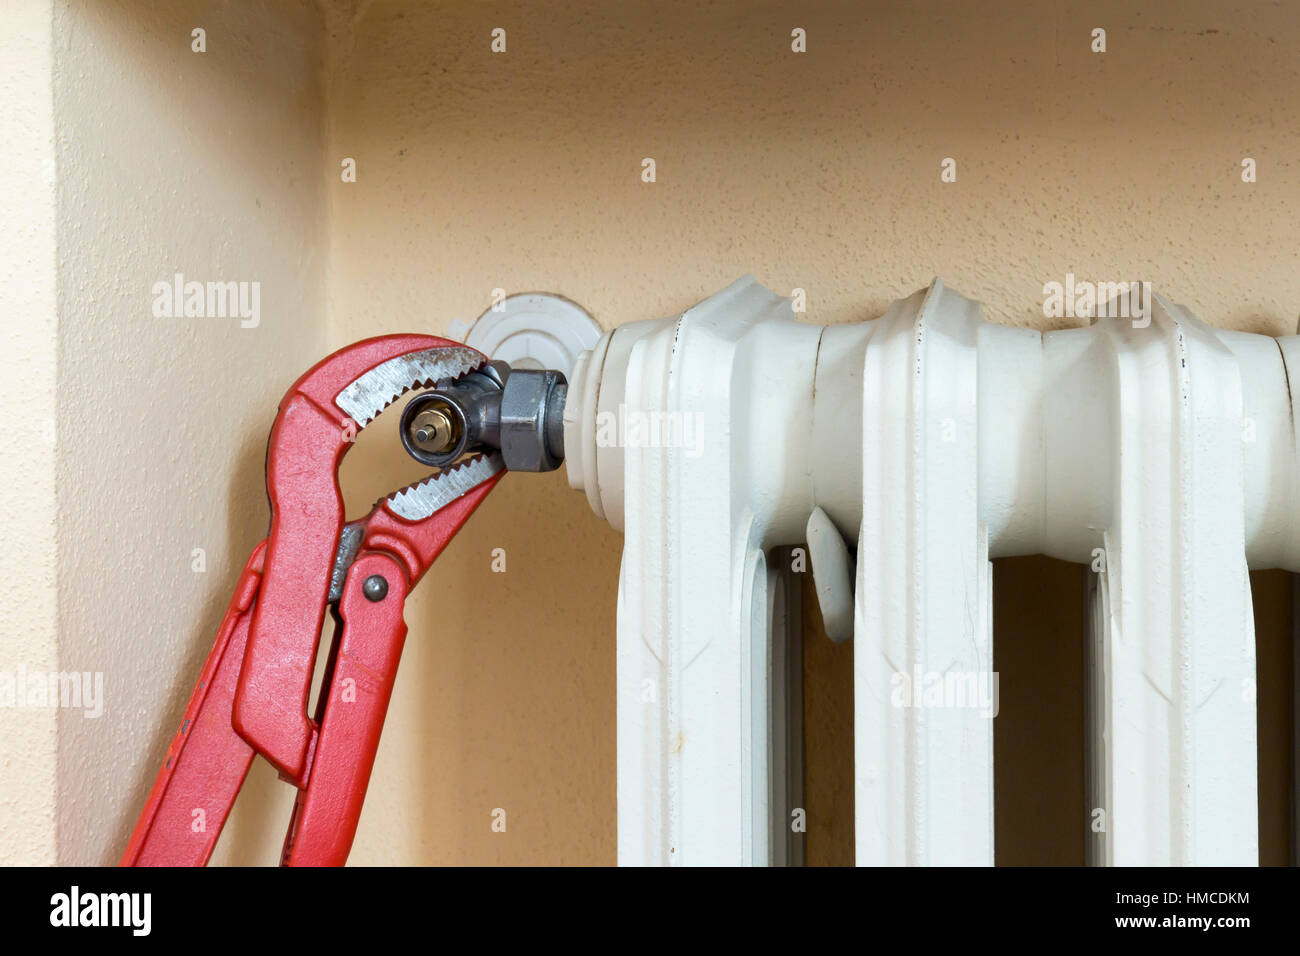 Plumber at work installing a thermostatic valve on a radiator Stock Photo